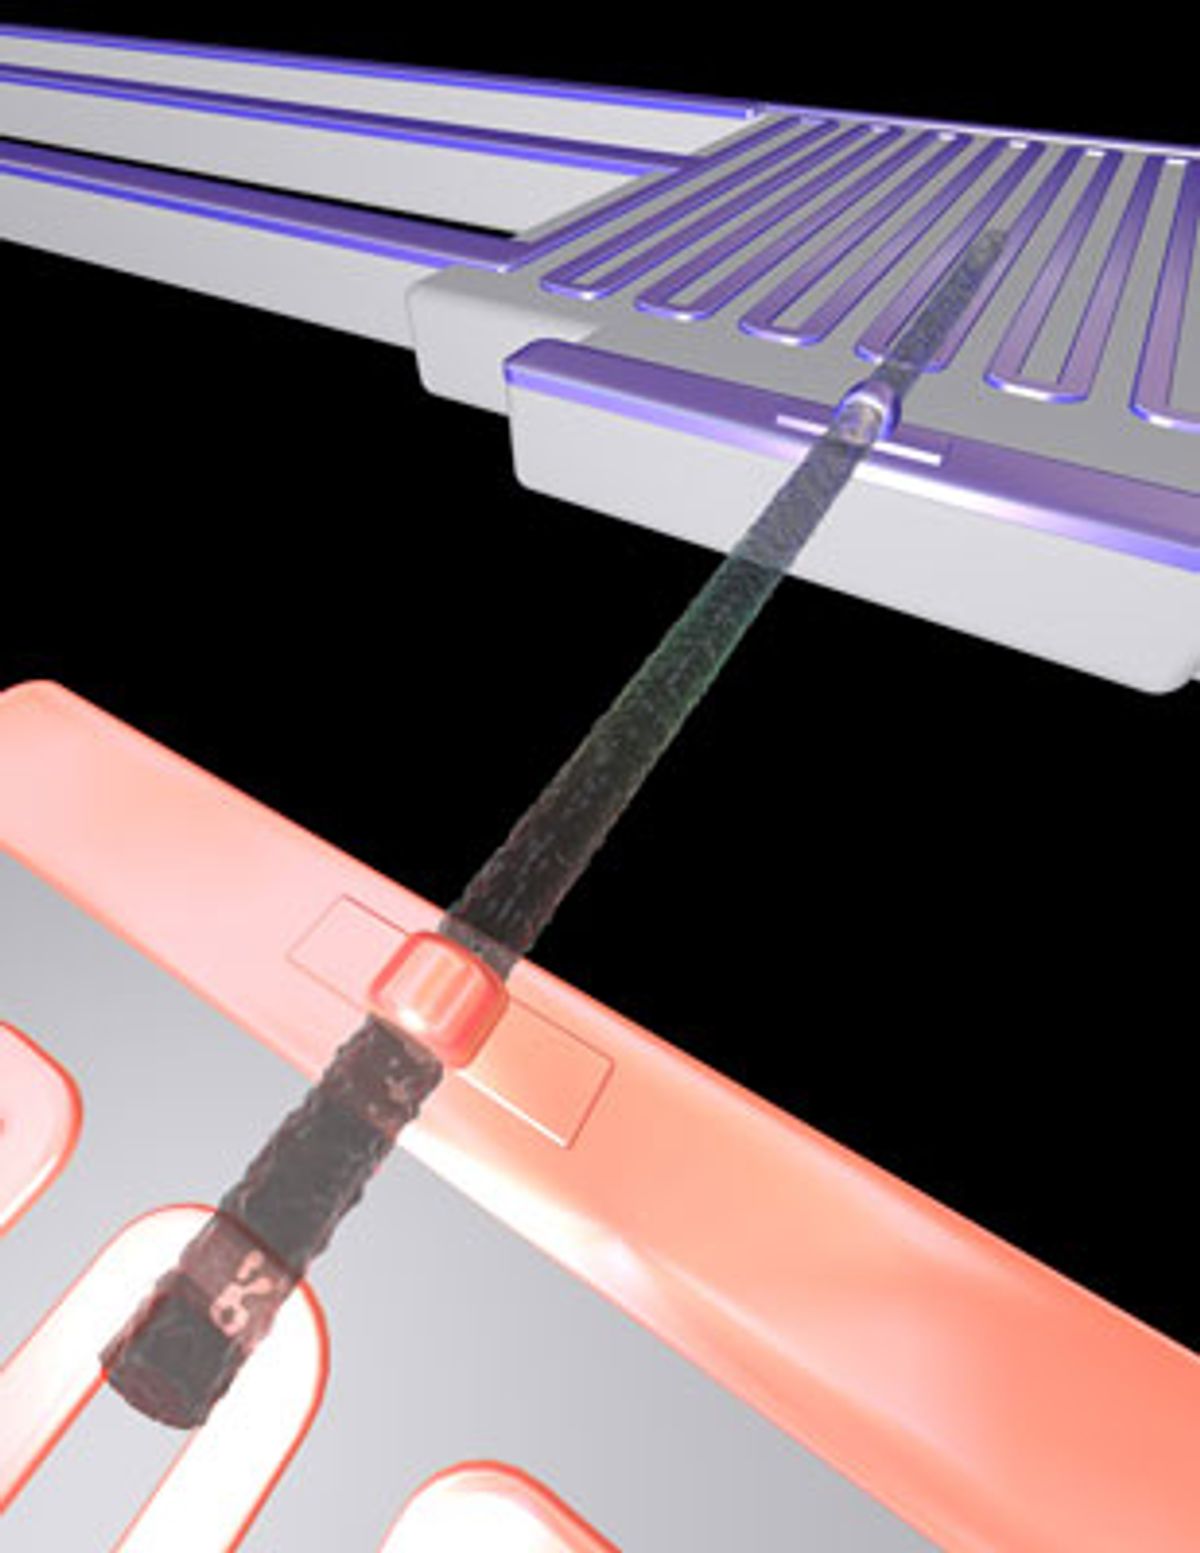 Silicon Nanowires Turn Heat to Electricity